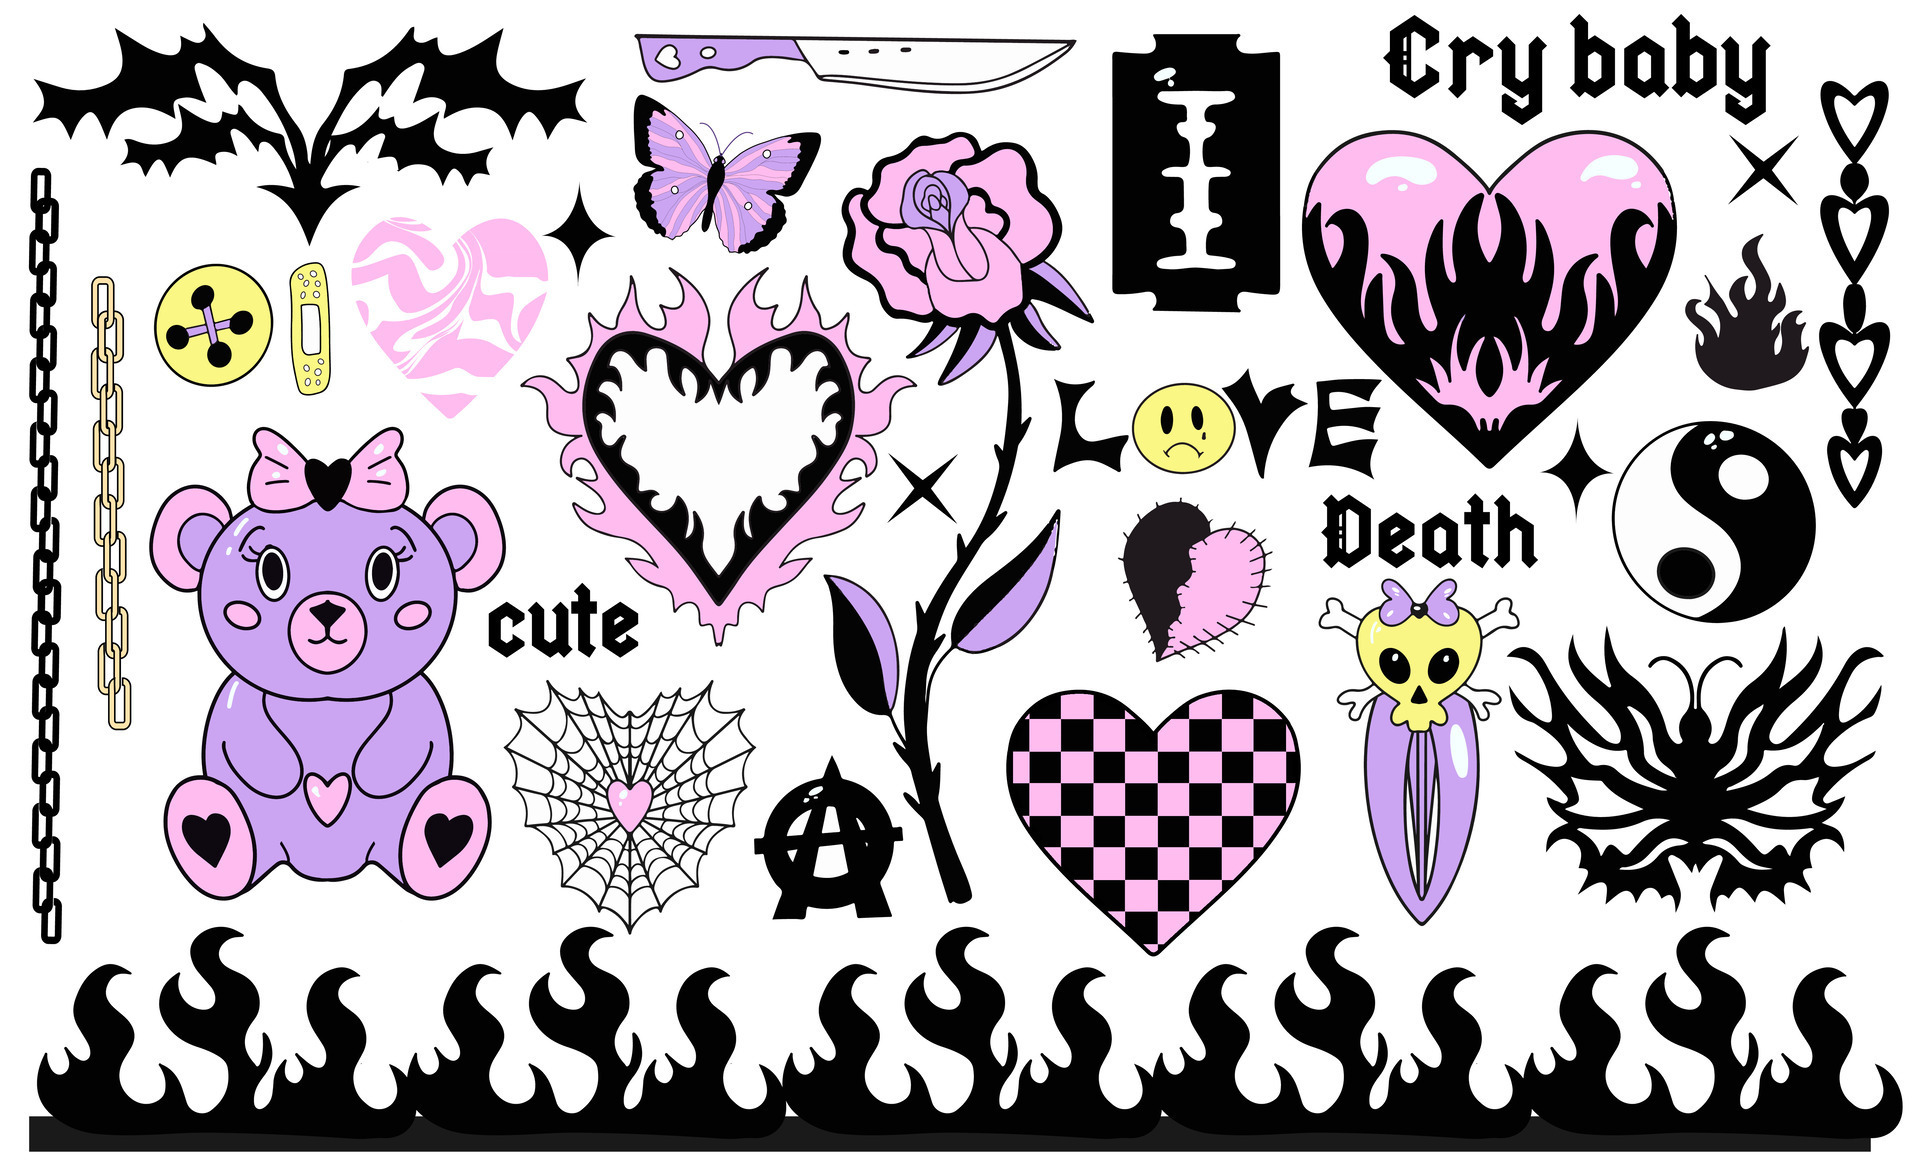 Y2k 2000s cute emo goth aesthetic stickers, tattoo art elements and ...